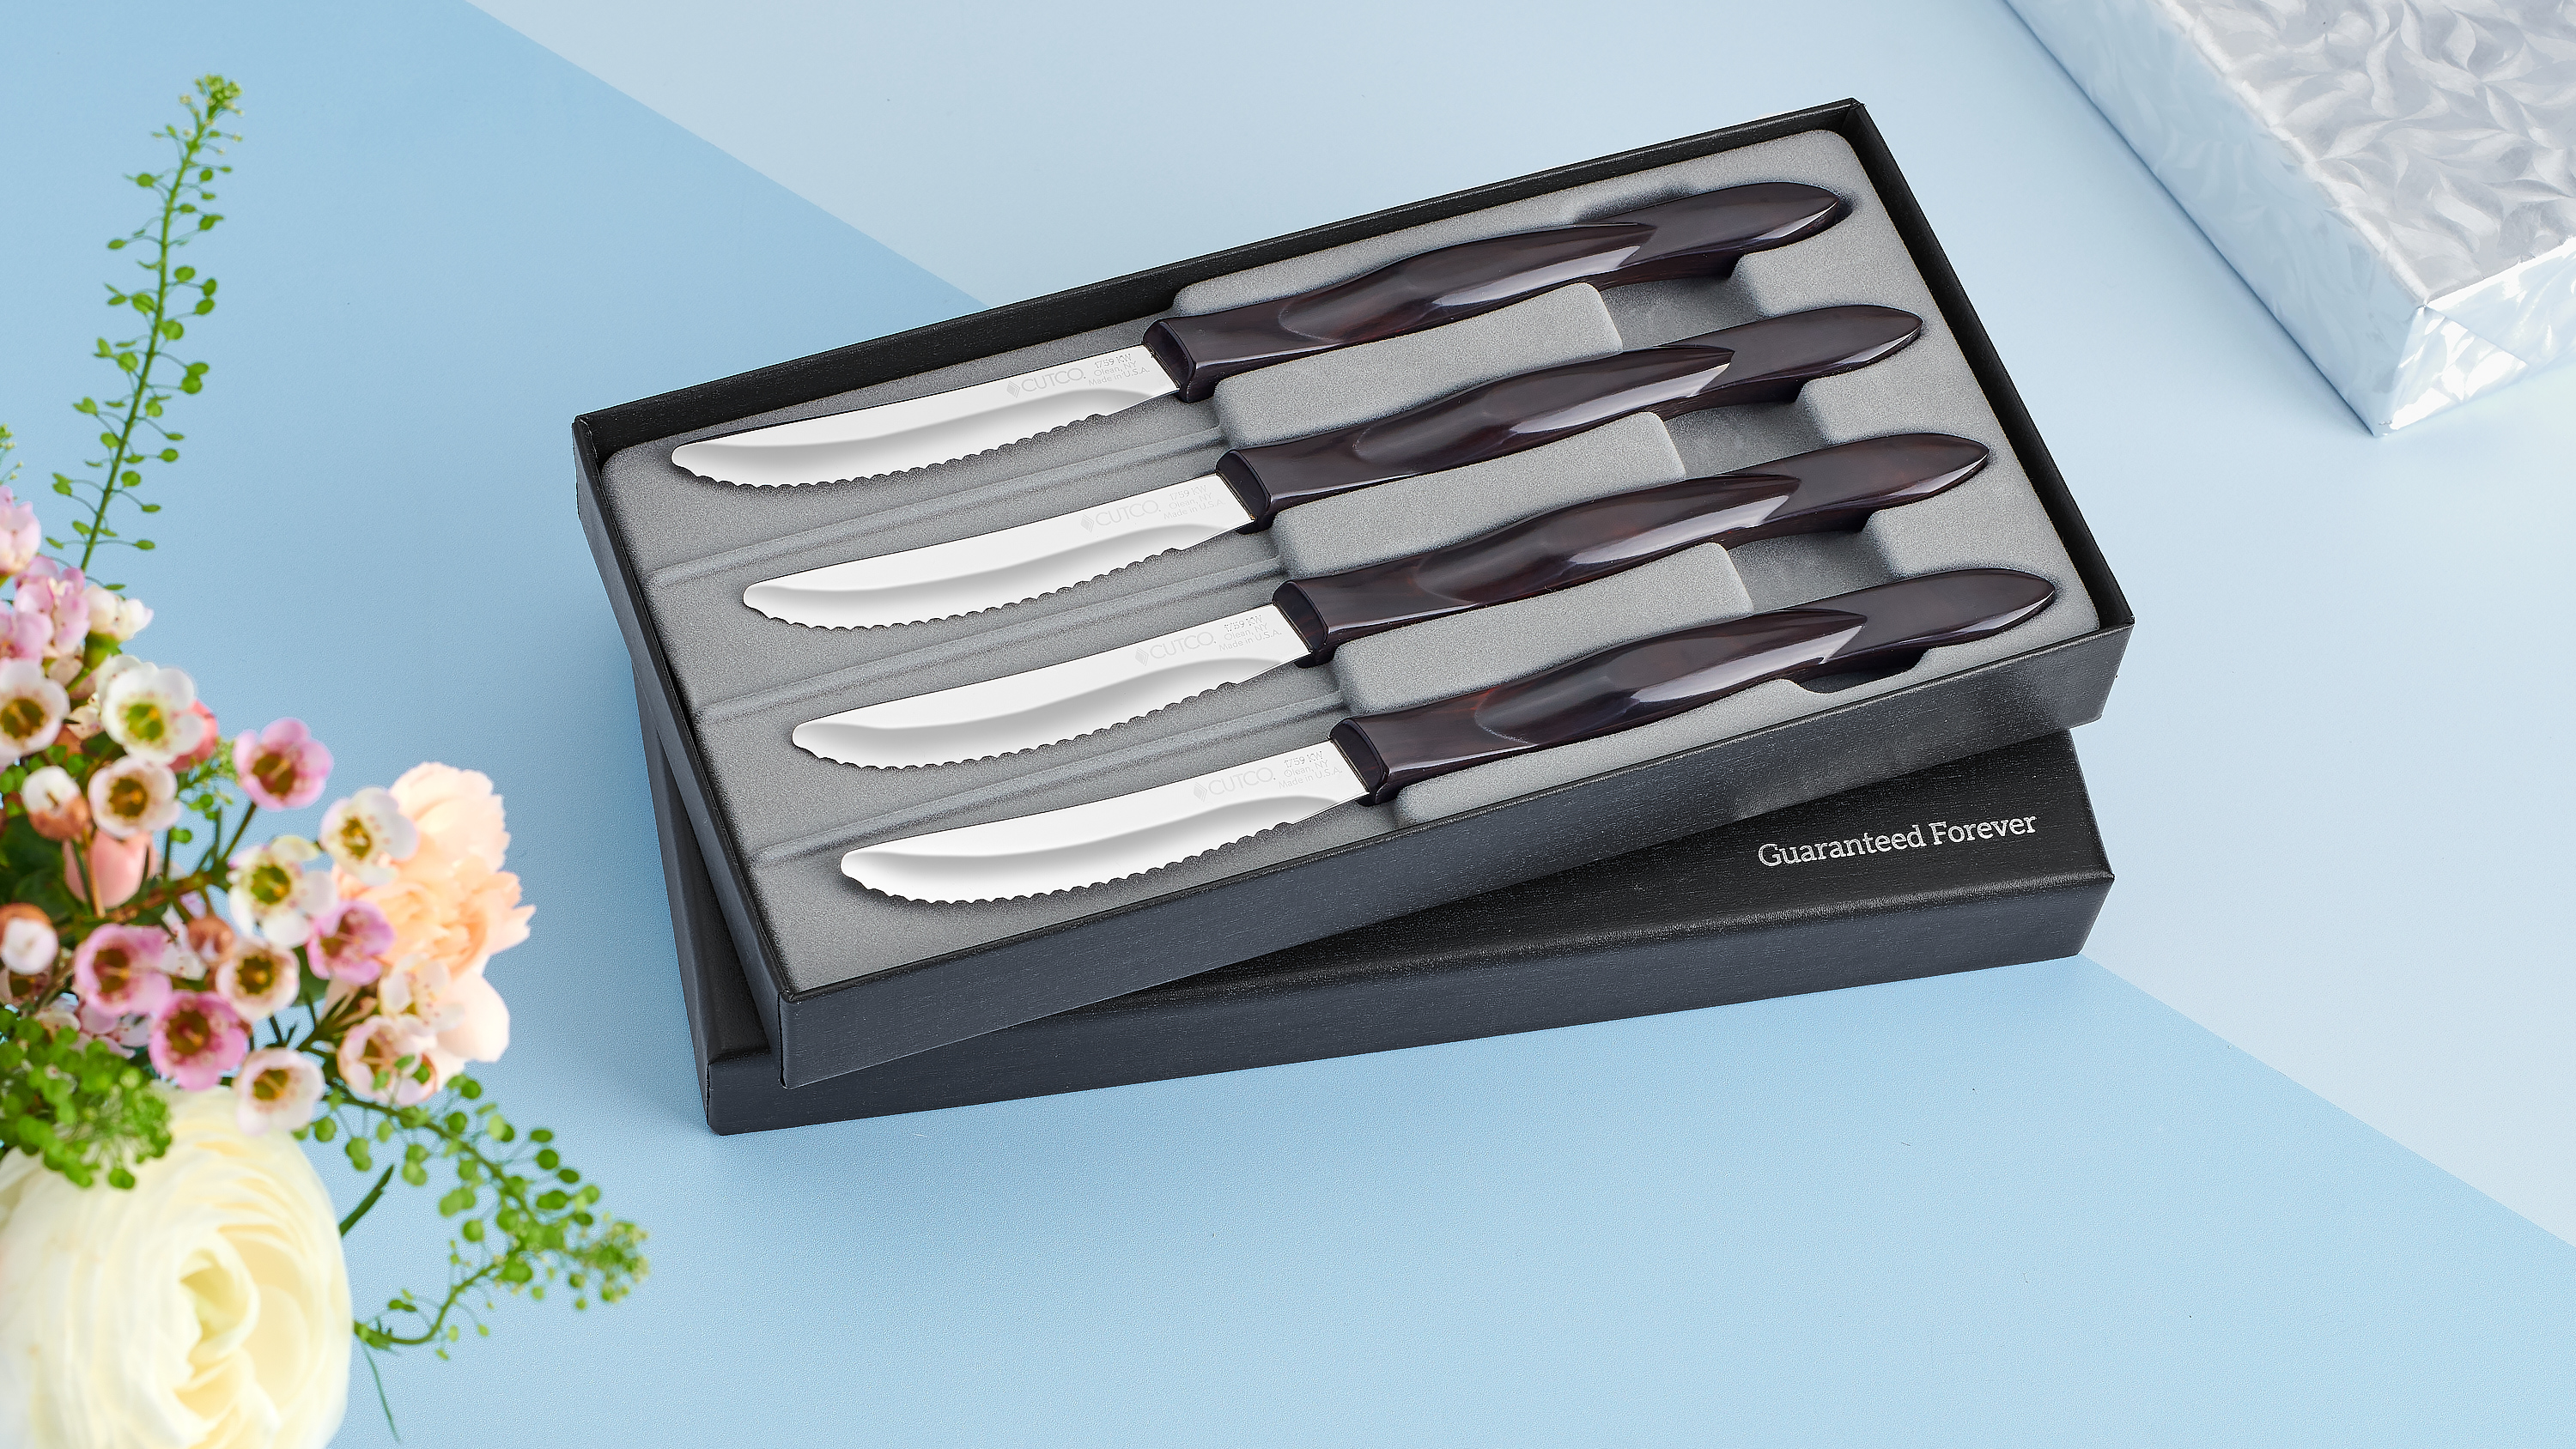 Cutco Knives Review & Giveaway (a $261 knife set!) - The Daring